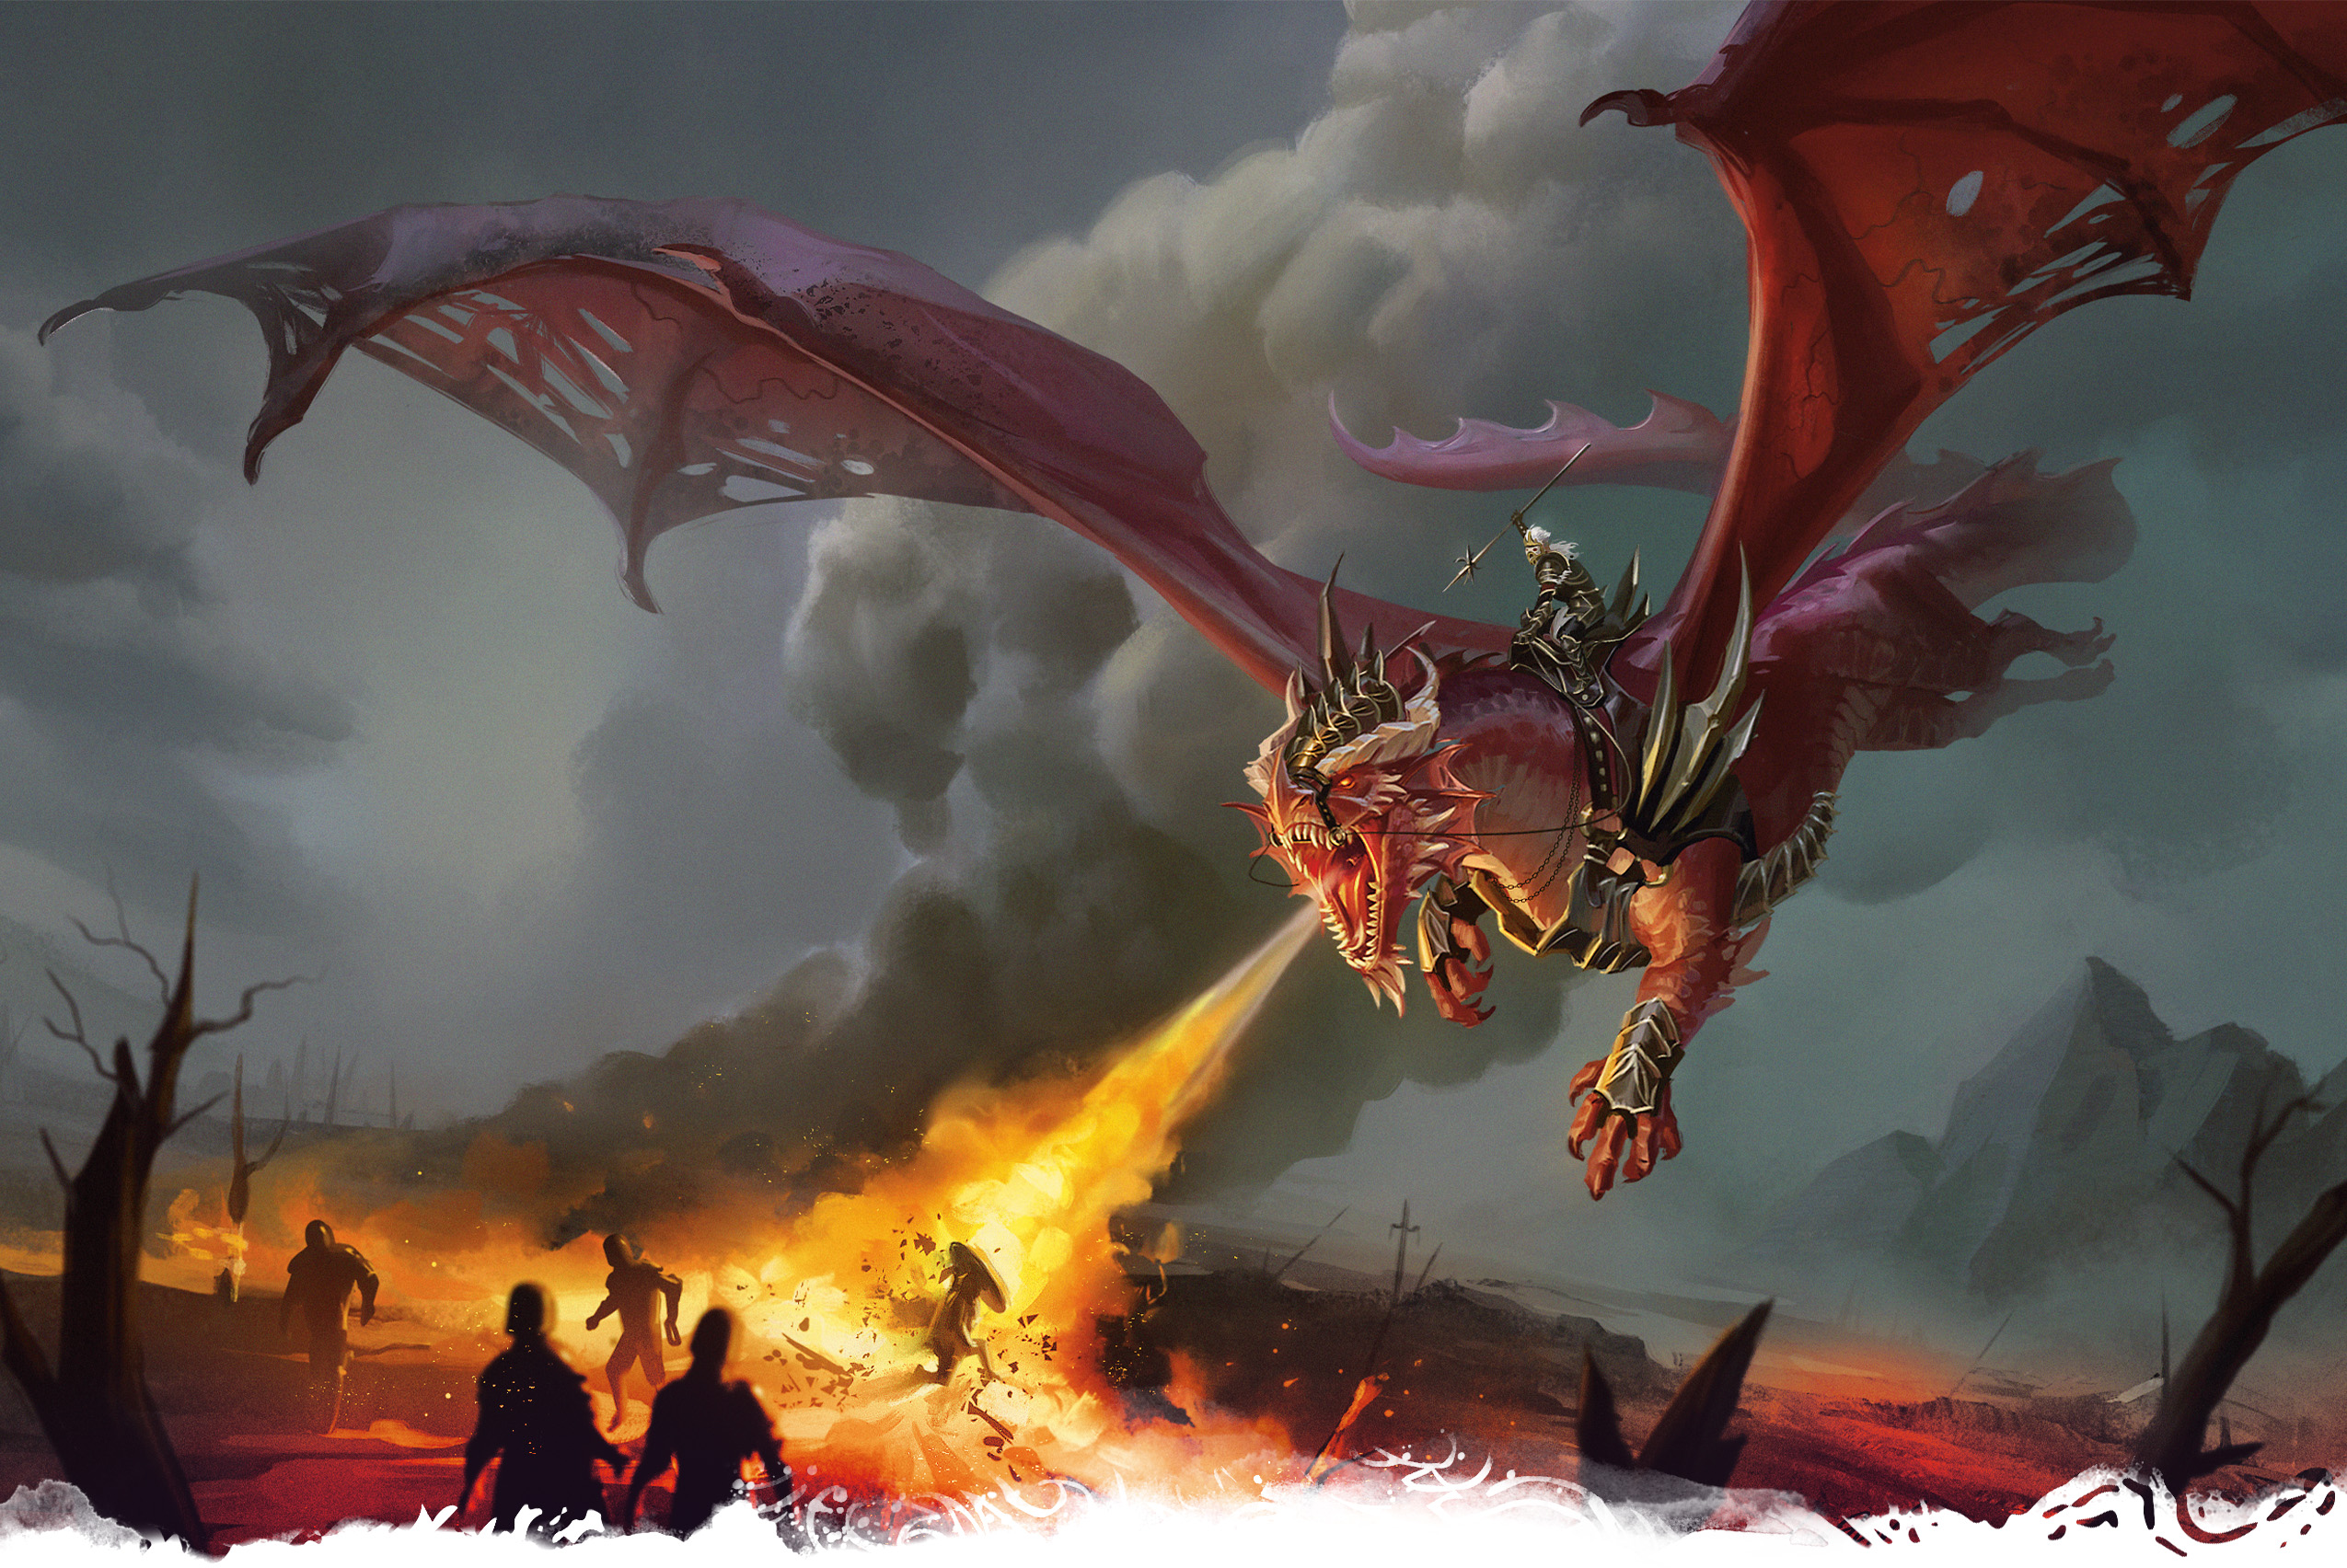 A dragon scorches the ground, it’s rider — lance in hand — bellowing a battle cry.